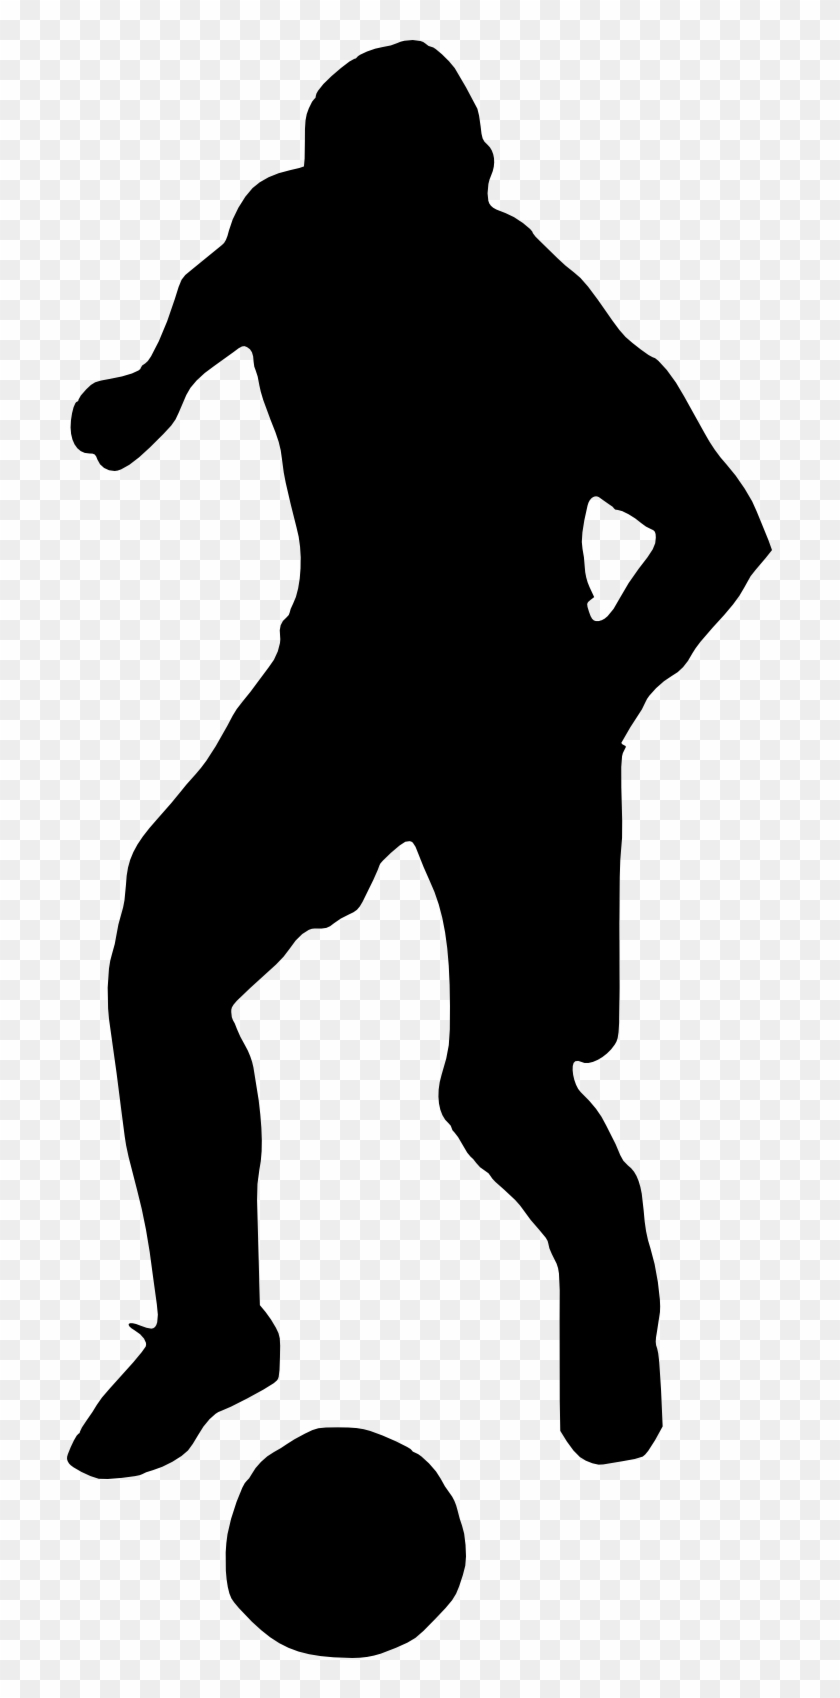 Football Silhouette Png - Football Player Silhouette Png Clipart #92913